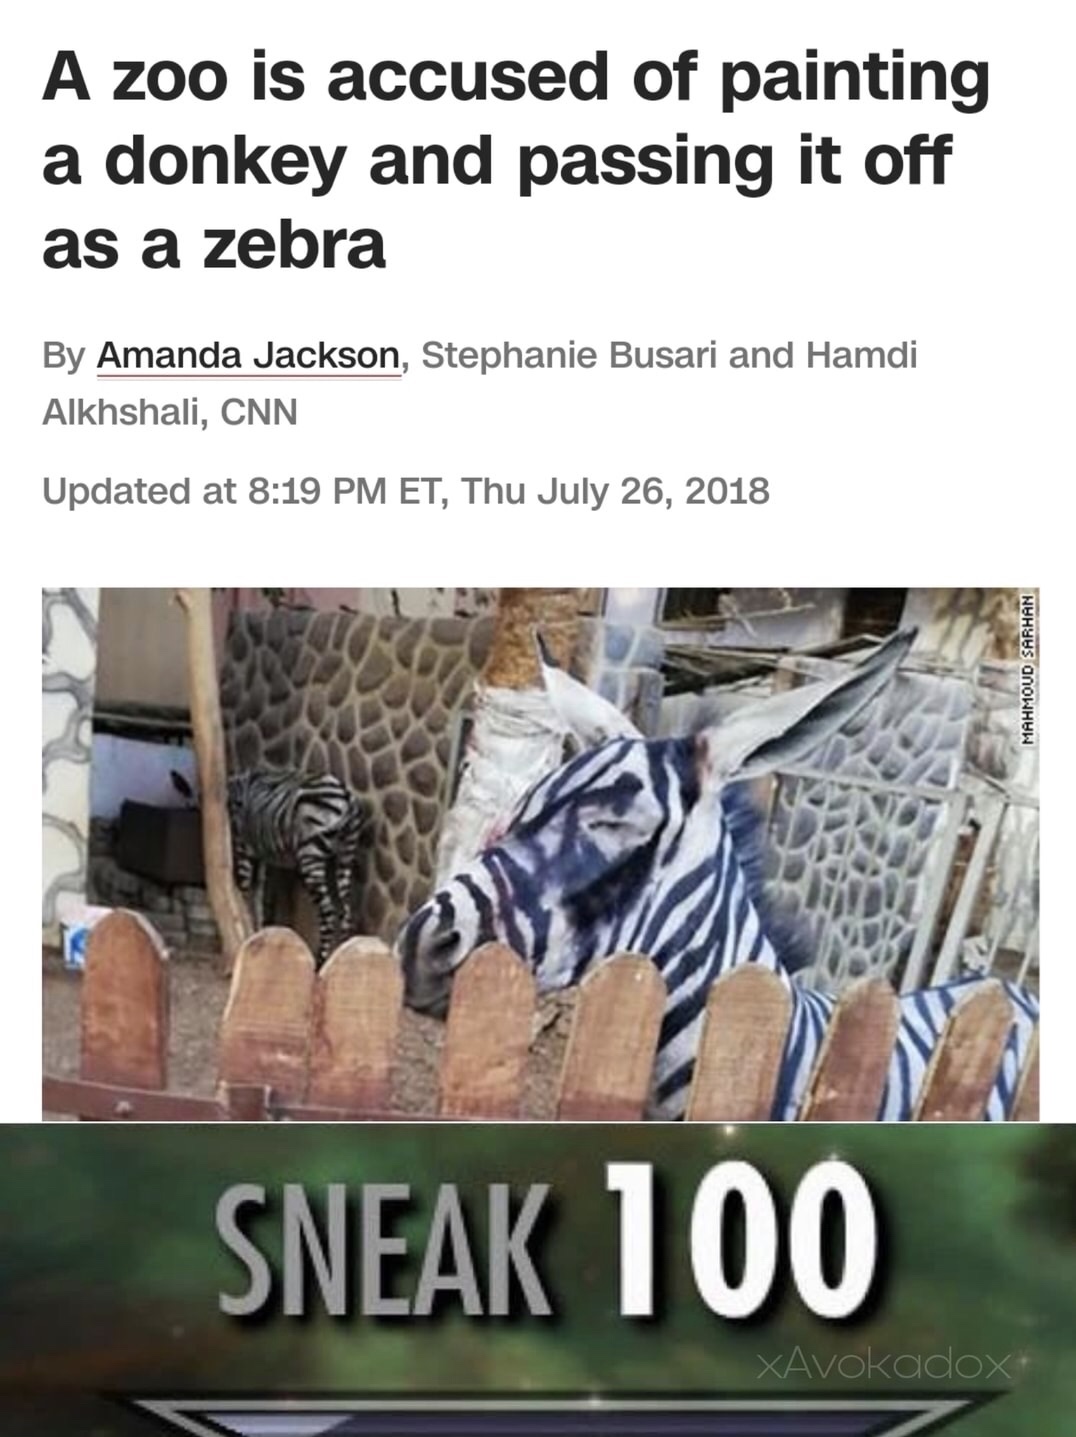 fake zebra egypt - A zoo is accused of painting a donkey and passing it off as a zebra By Amanda Jackson, Stephanie Busari and Hamdi Alkhshali, Cnn Updated at Et, Thu Mahmoud Sarhan Sneak 100 XAvokadox